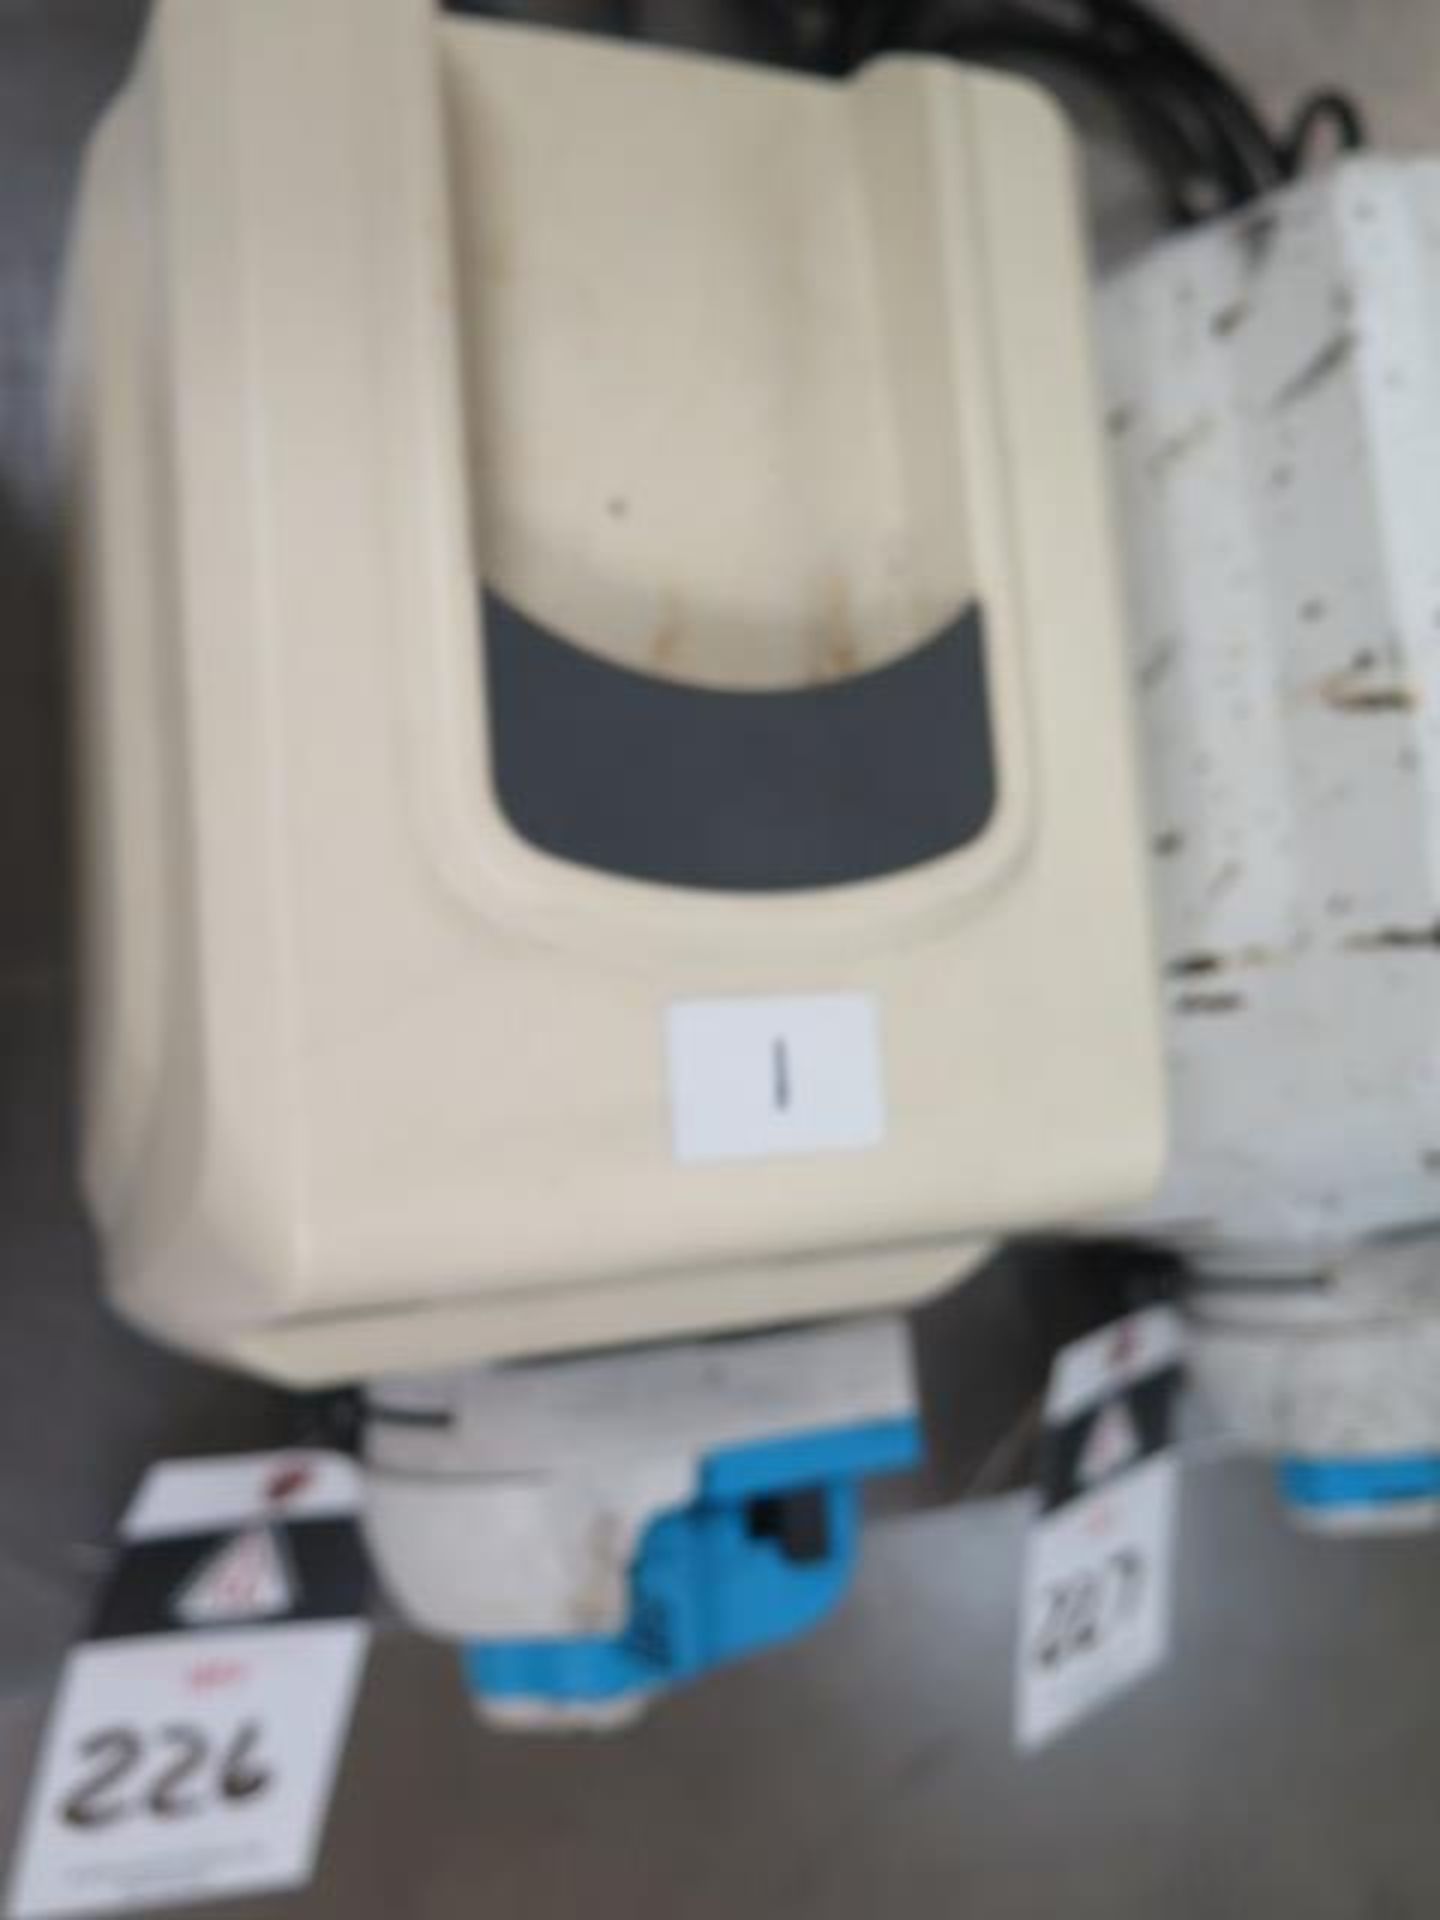 Cole-Parmer Masterflex L/S Peristaltic Pump, SOLD AS IS AND WITH NO WARRANTY - Image 3 of 4